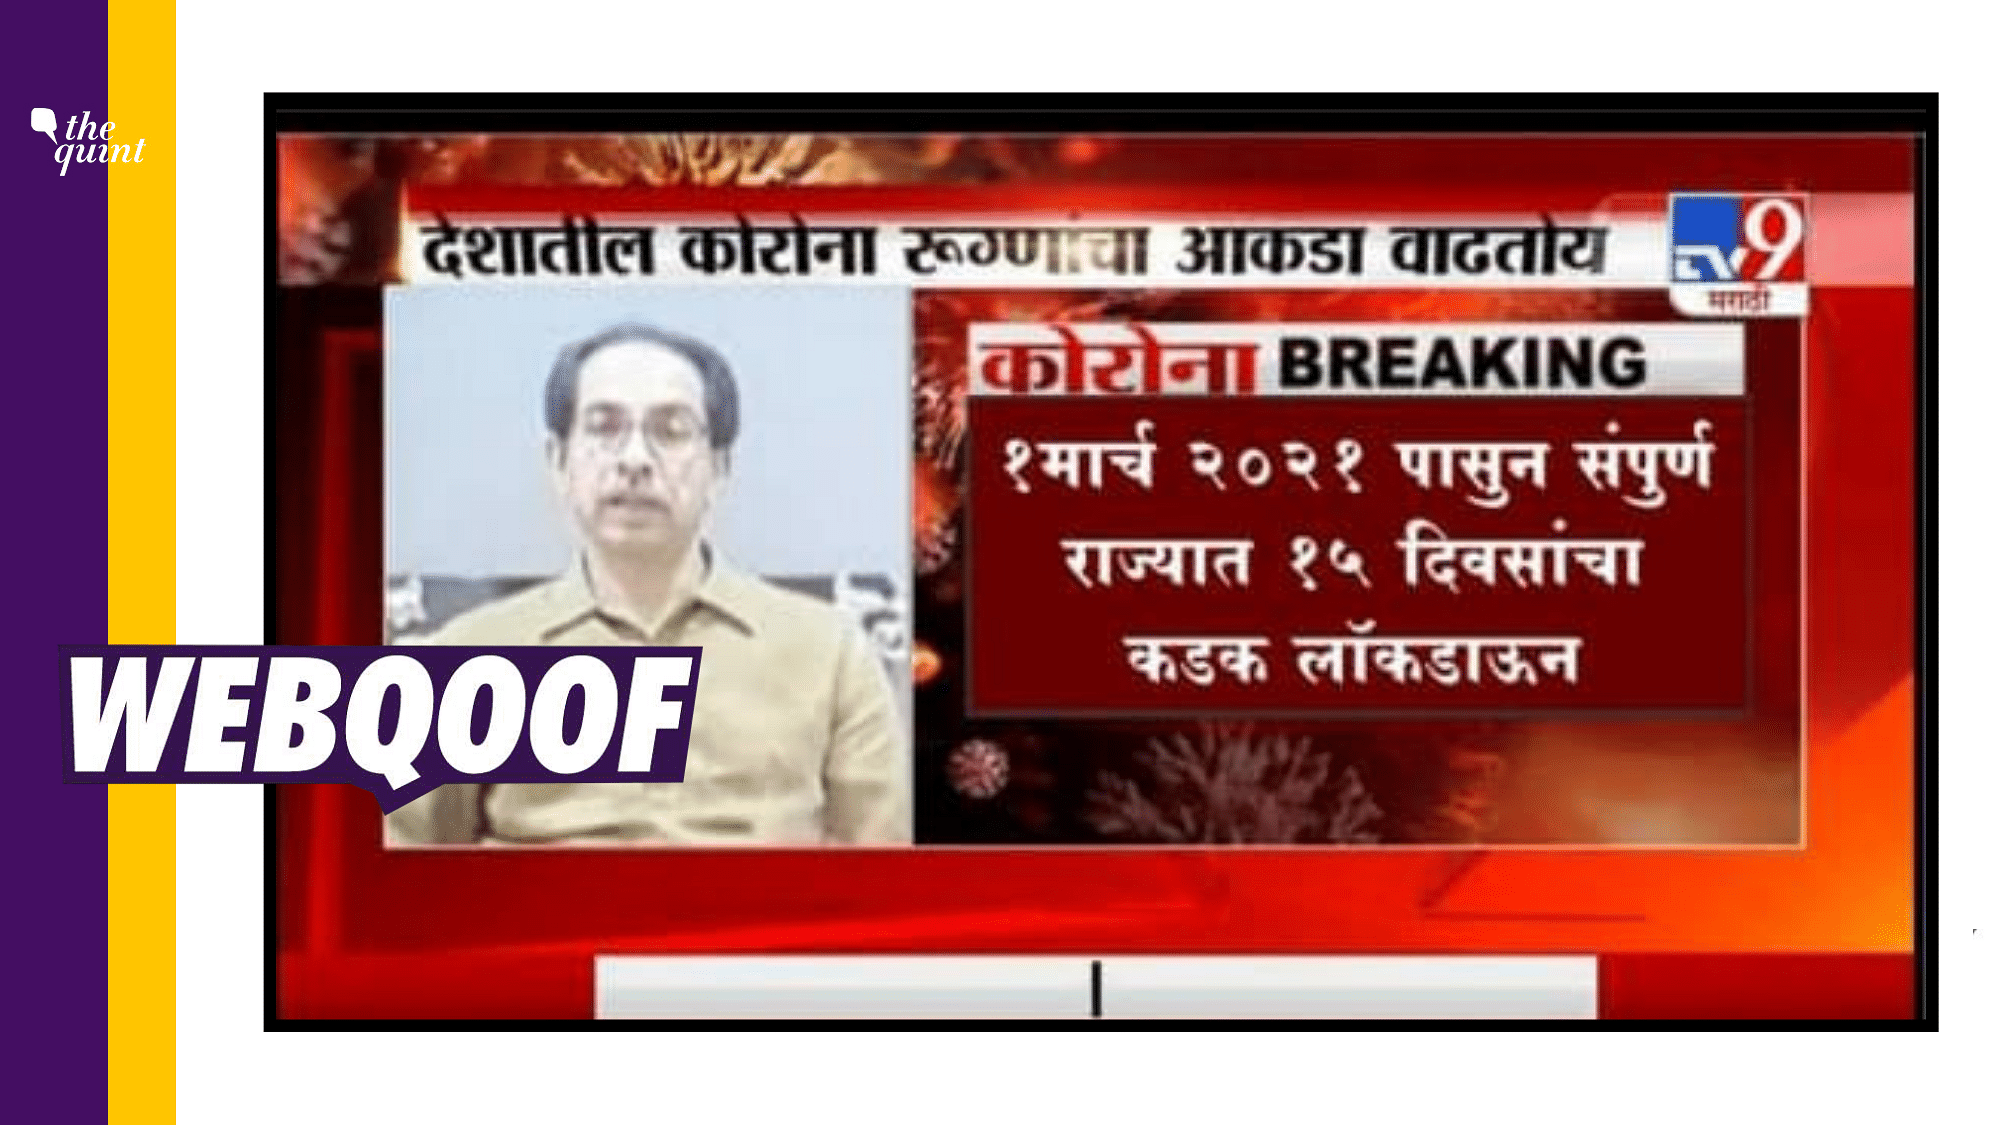 A screenshot of a news bulletin has been  edited to carry a logo of TV9 Marathi, and falsely claim that Thackeray had announced a lockdown from 1 March.